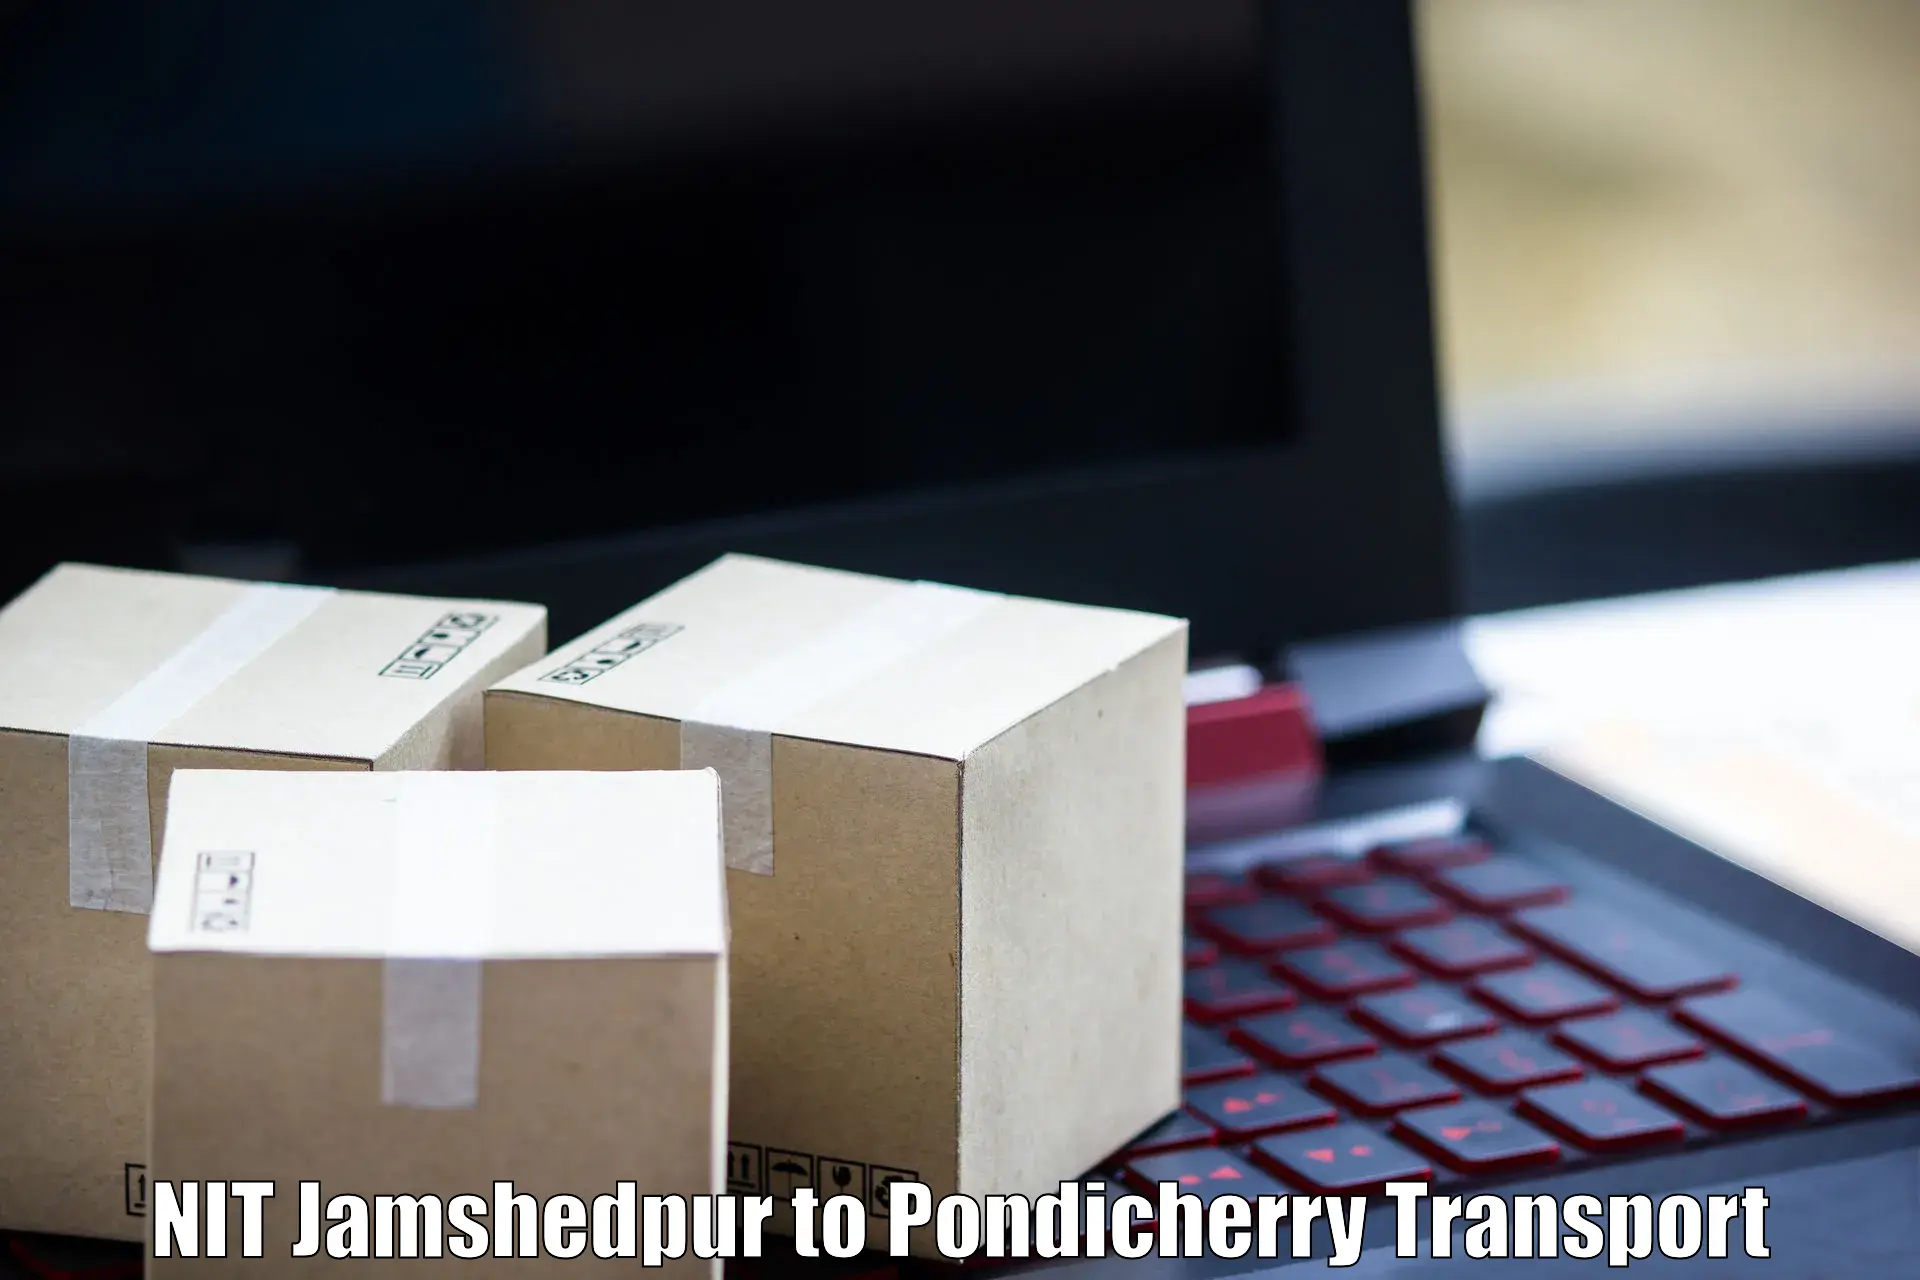 Delivery service NIT Jamshedpur to NIT Puducherry